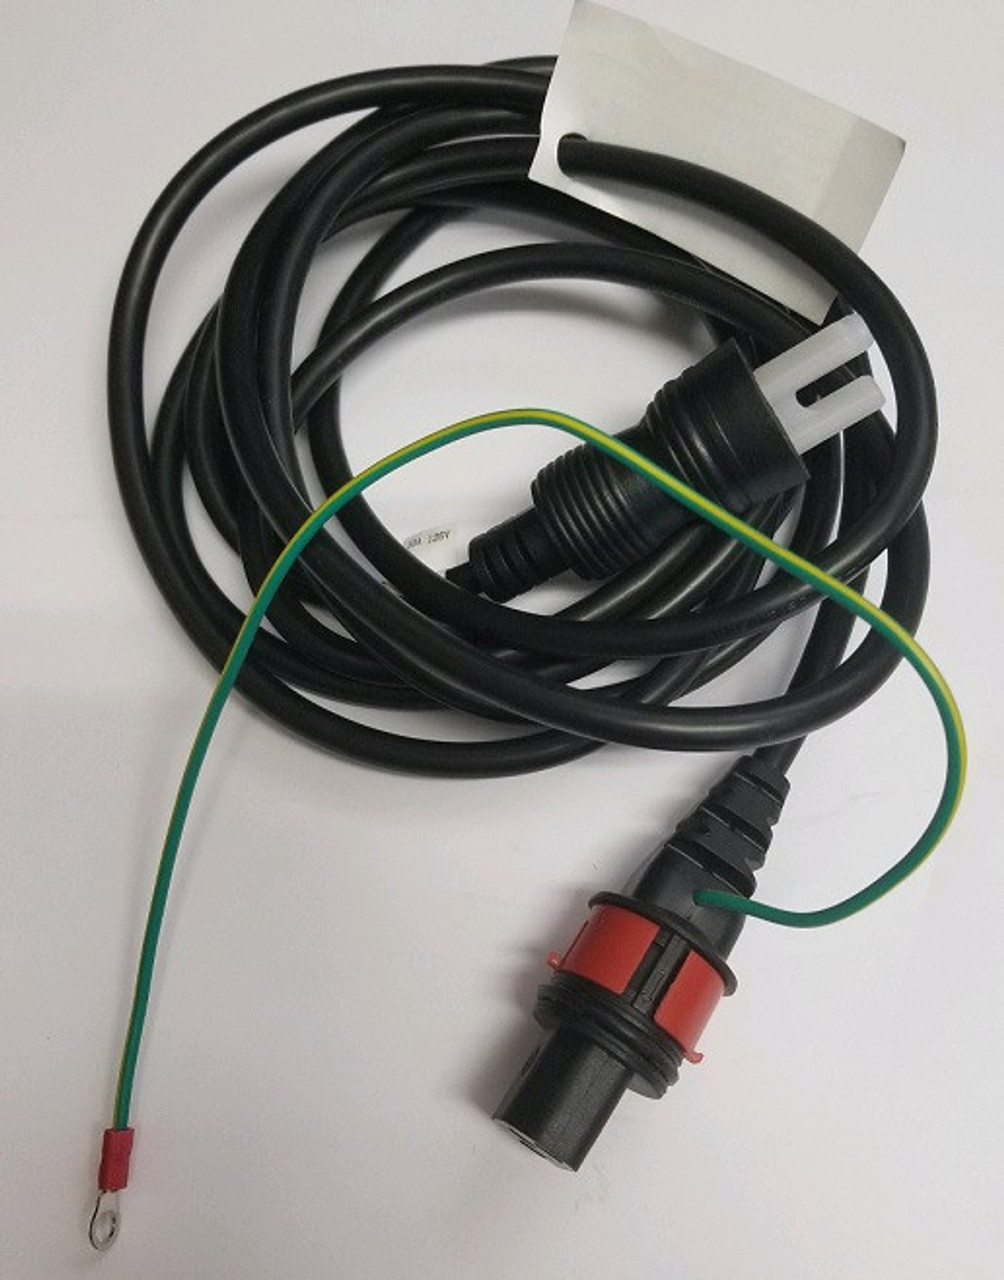 Looking for Chattanooga Triton 2000 Power Cord, Chattanooga Triton 2000 Table, Chattanooga Triton 2000 Table Power Cord, Power Cord Chattanooga Triton 2000 Table, replacement Power Cord for Chattanooga Triton 2000 Table, replacement Chattanooga Triton 2000 Table Power Cord, Chattanooga Triton 2000 Power Control Box Power Cord, E1995, Chattanooga Triton 2000 Power Control Box?